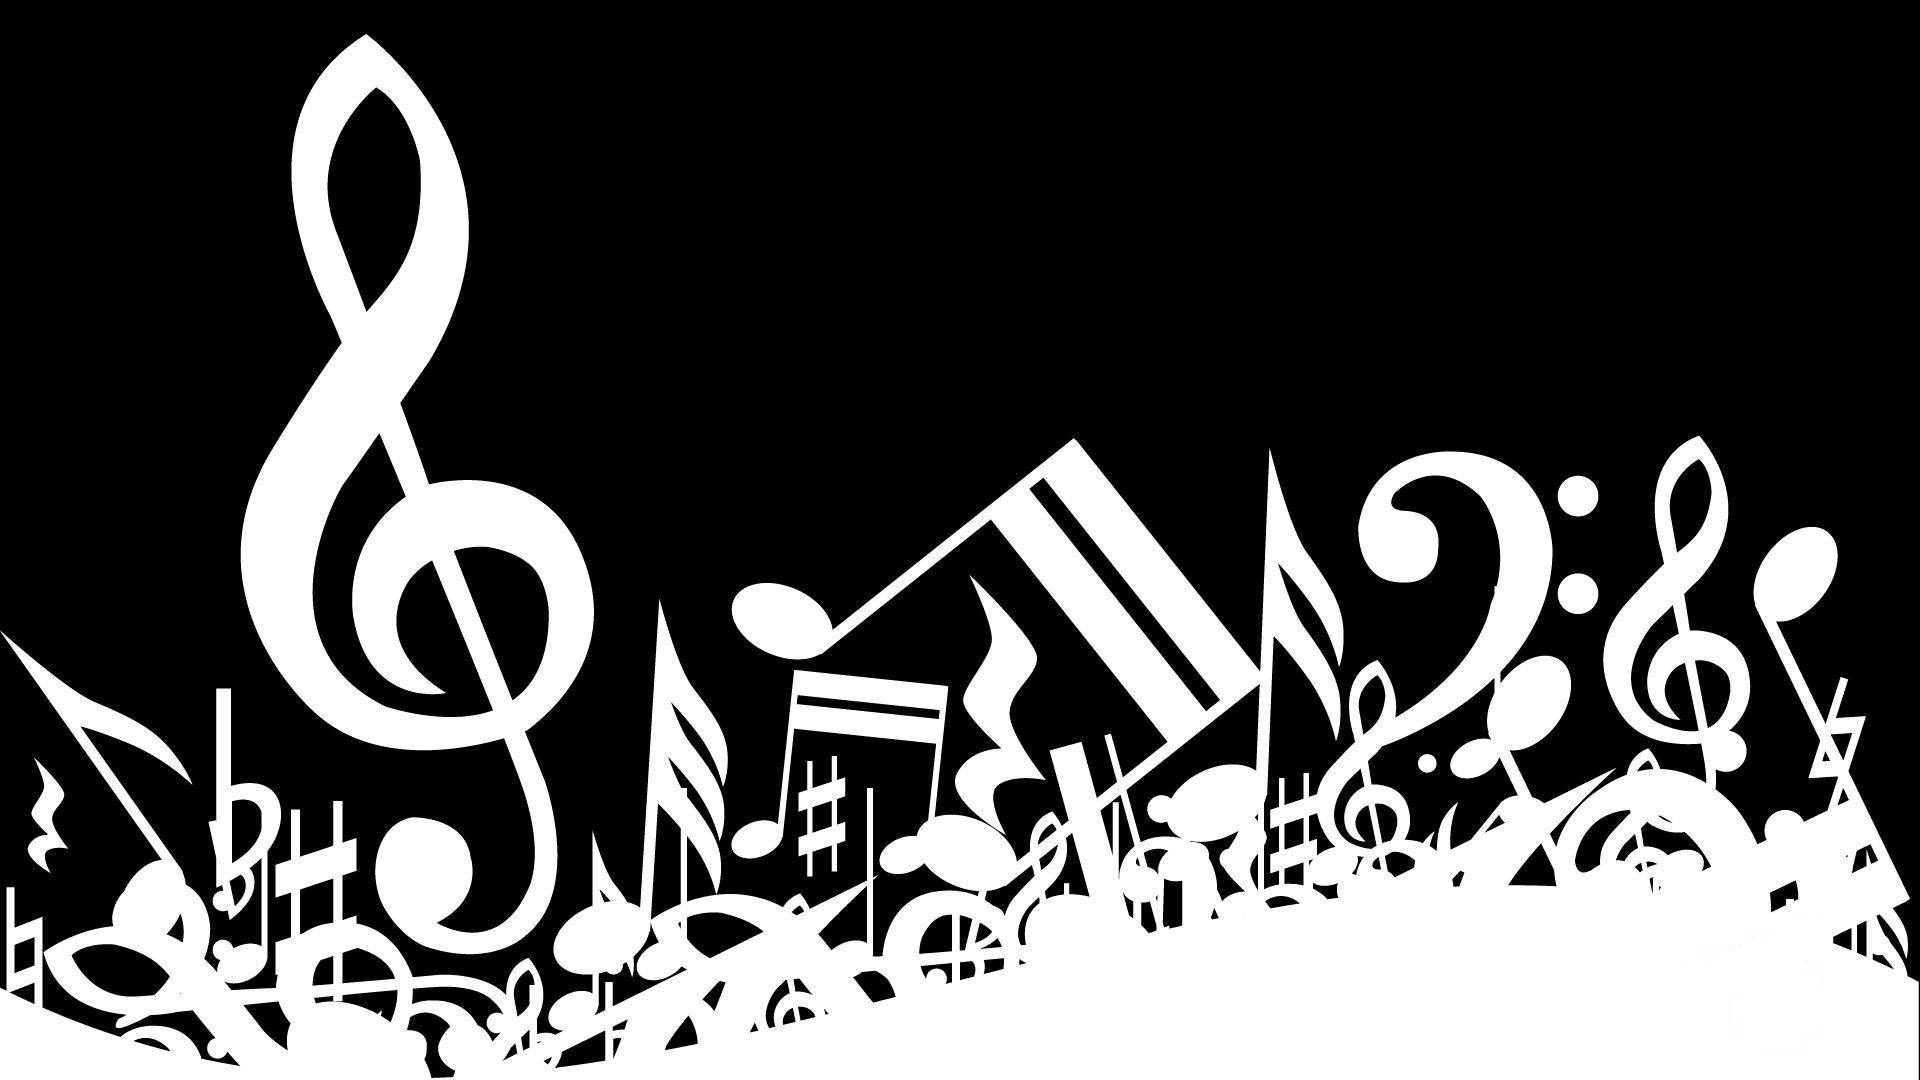 1920x1080 Download Black And White Musical Notes Wallpaper